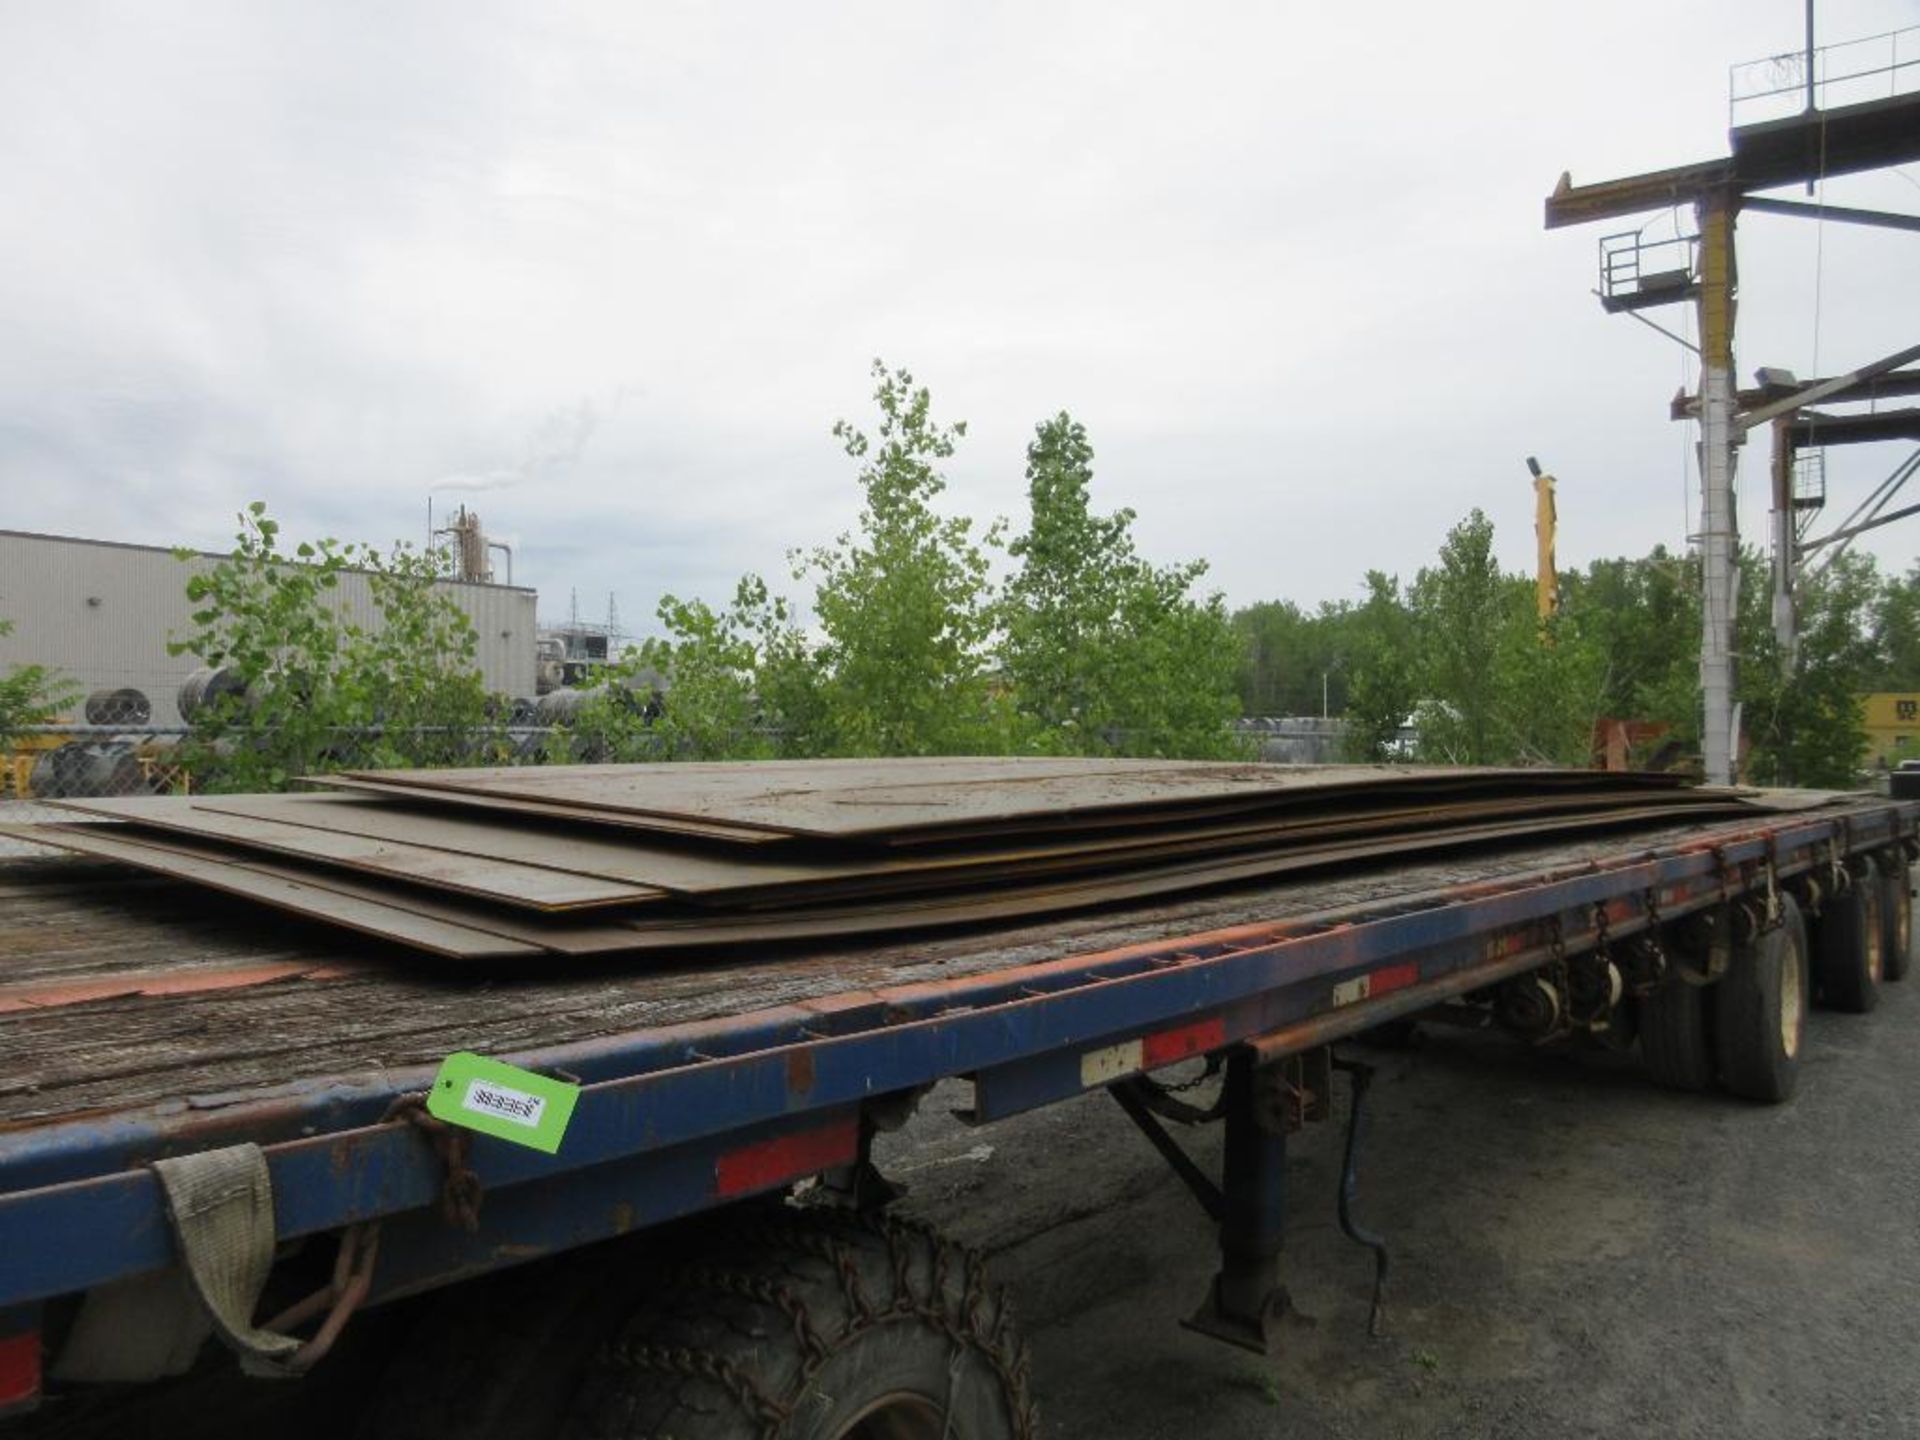 LOT OF 27 SHEETS OF PLATE STEEL ON TRAILER (NO TRAILER), TOTAL WEIGHT 293,559 LBS, SIZES PER PHOTO (